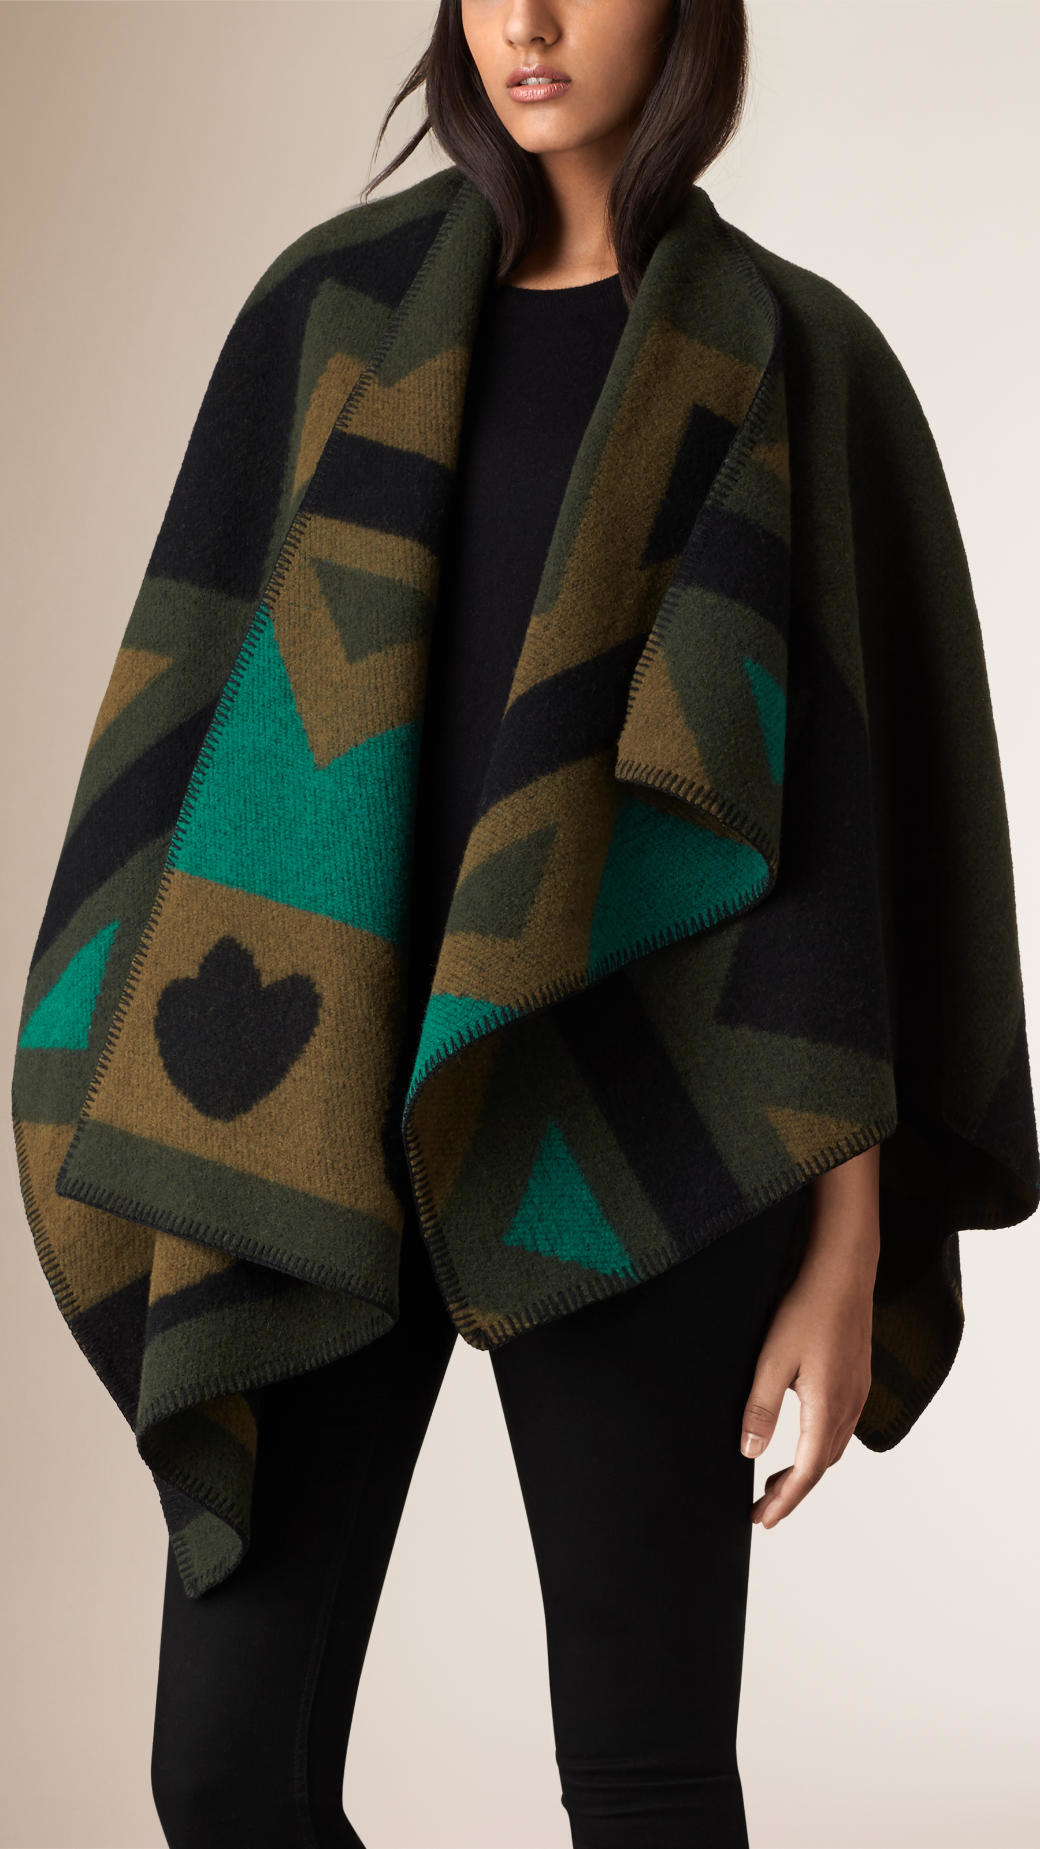 Burberry Graphic Wool And Cashmere Blanket Poncho in Olive Green (Green) -  Lyst